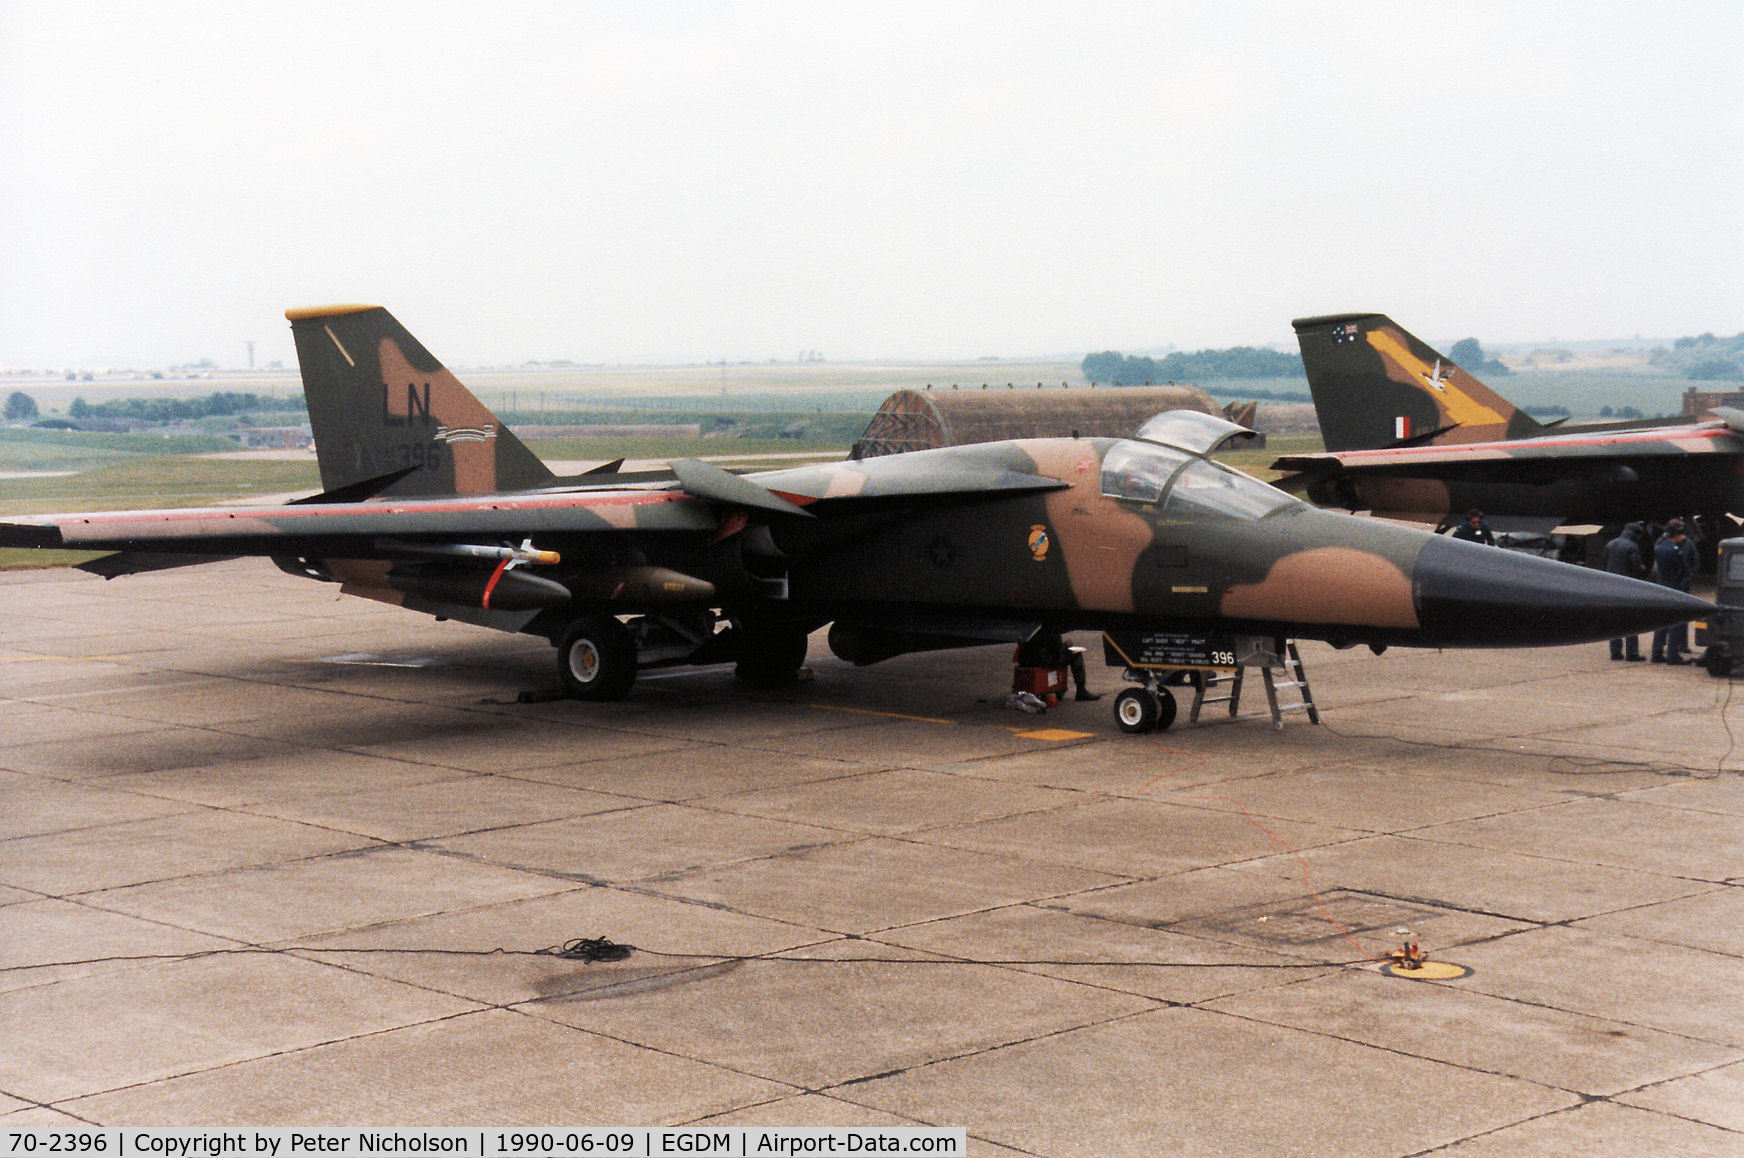 70-2396, 1970 General Dynamics F-111F Aardvark C/N E2-35, F-111F, callsign Topcat 31, of 493rd Tactical Fighter Squadron/48th Tactical Fighter Wing on the flight-line at the 1990 Boscombe Down Battle of Britain 50th Anniversary Airshow.